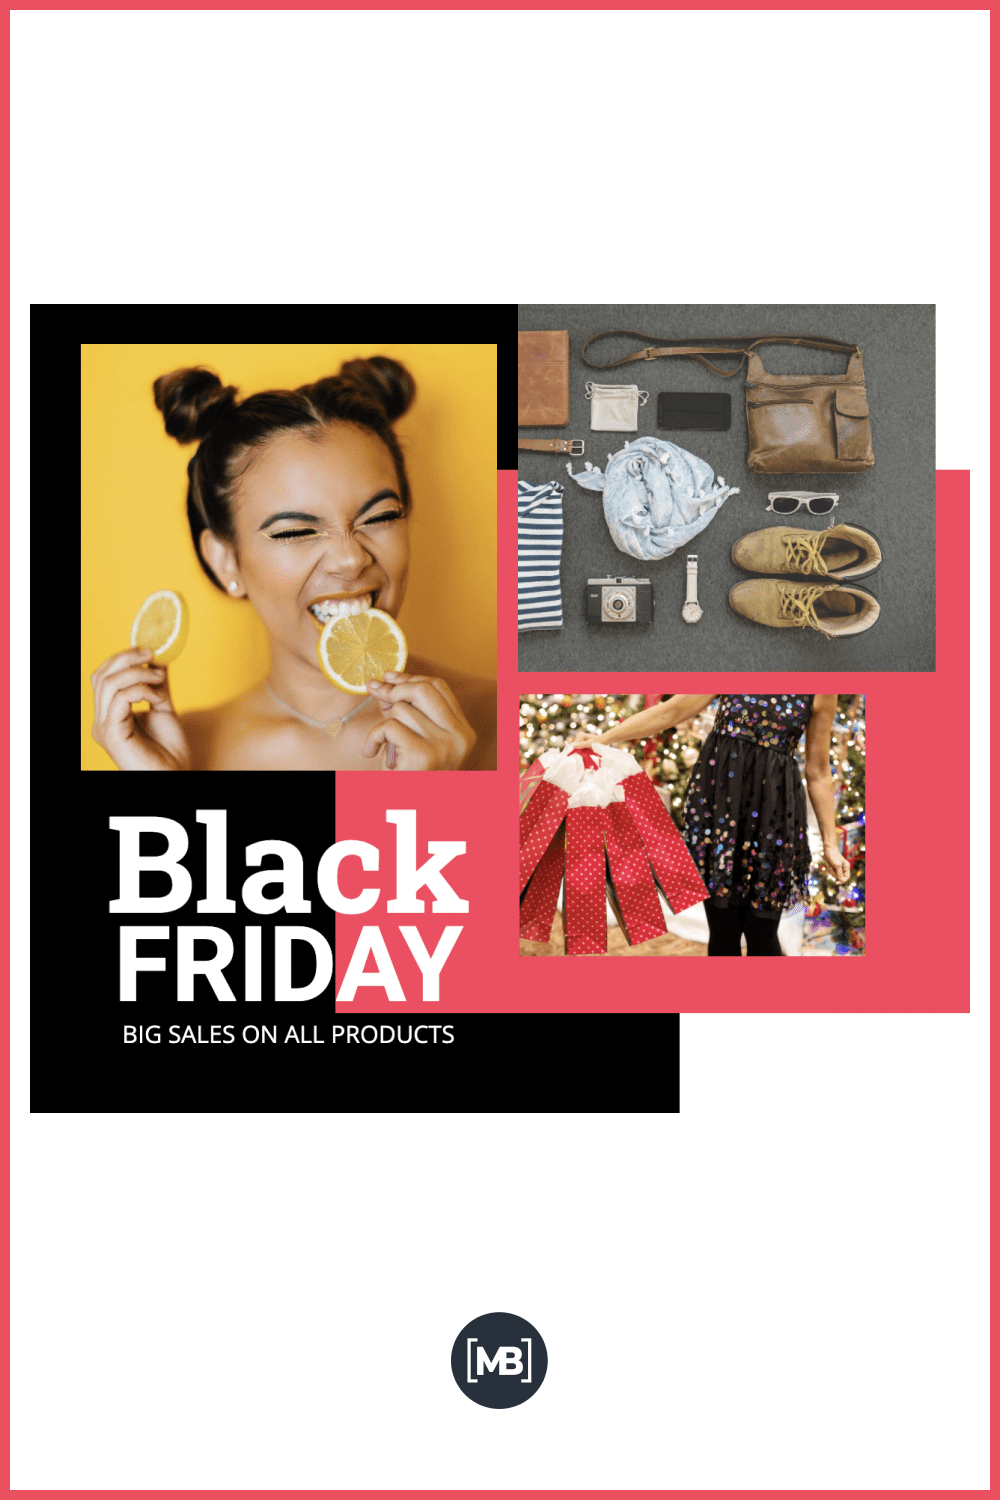 Black Friday Website Template with Happy Girl with Lemon.